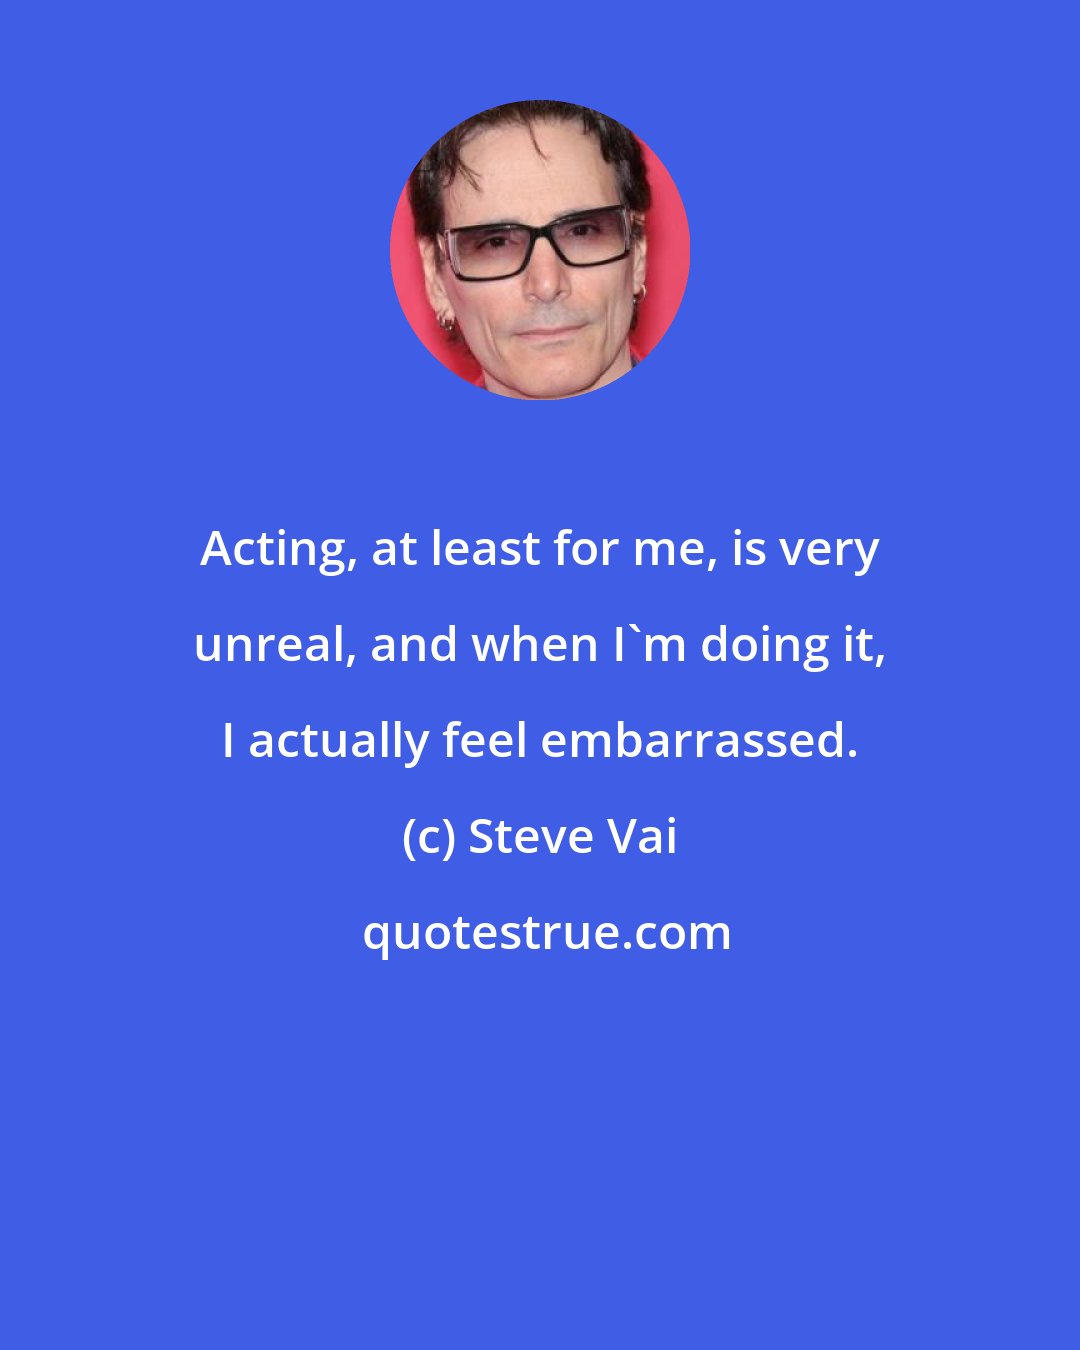 Steve Vai: Acting, at least for me, is very unreal, and when I'm doing it, I actually feel embarrassed.